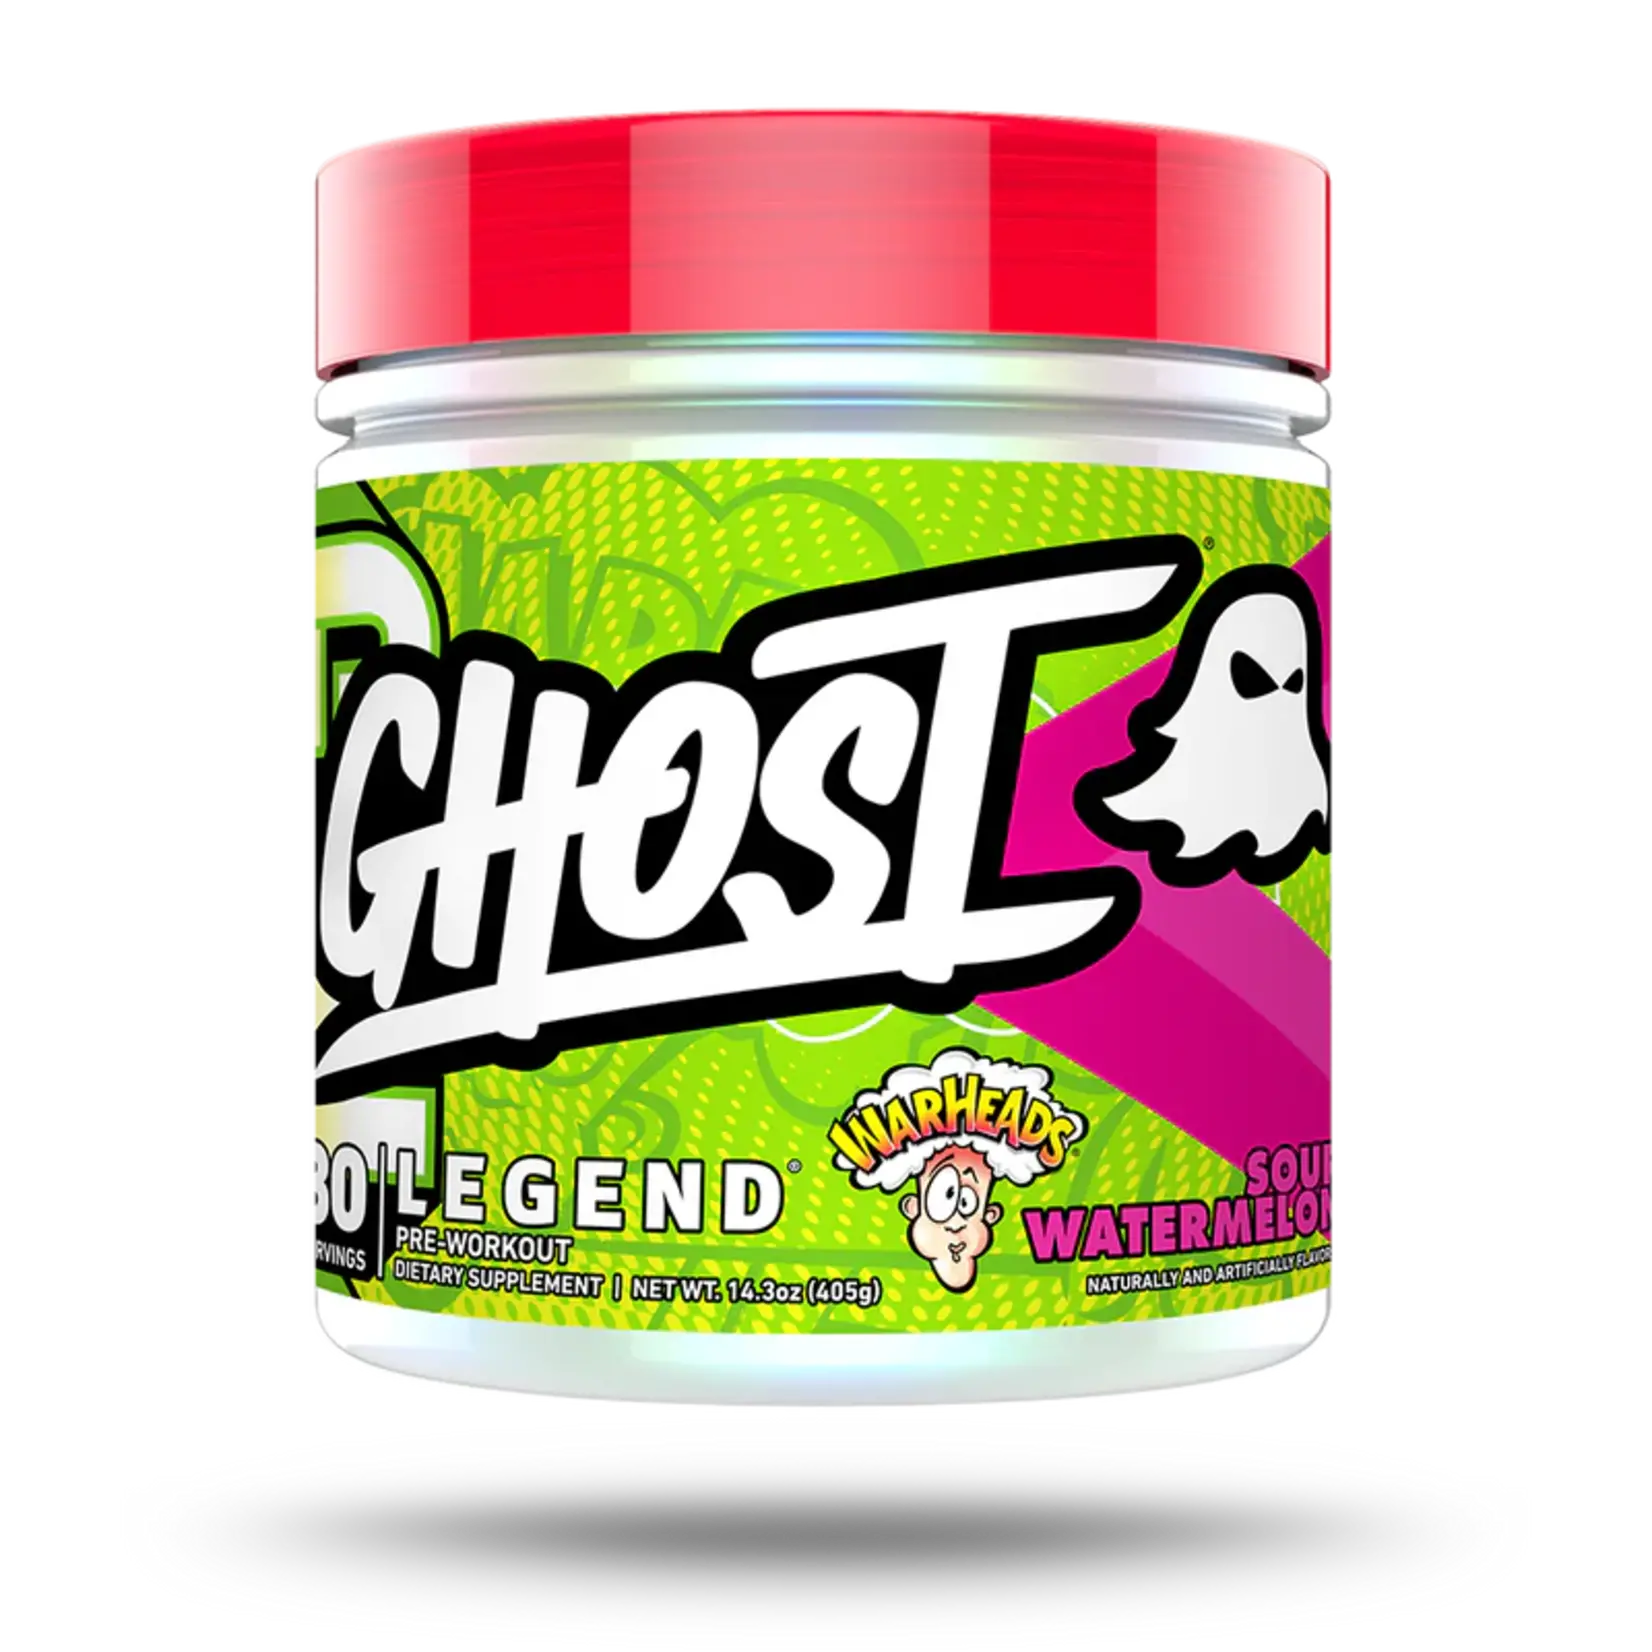 Ghost Ghost Legend Pre-Workout